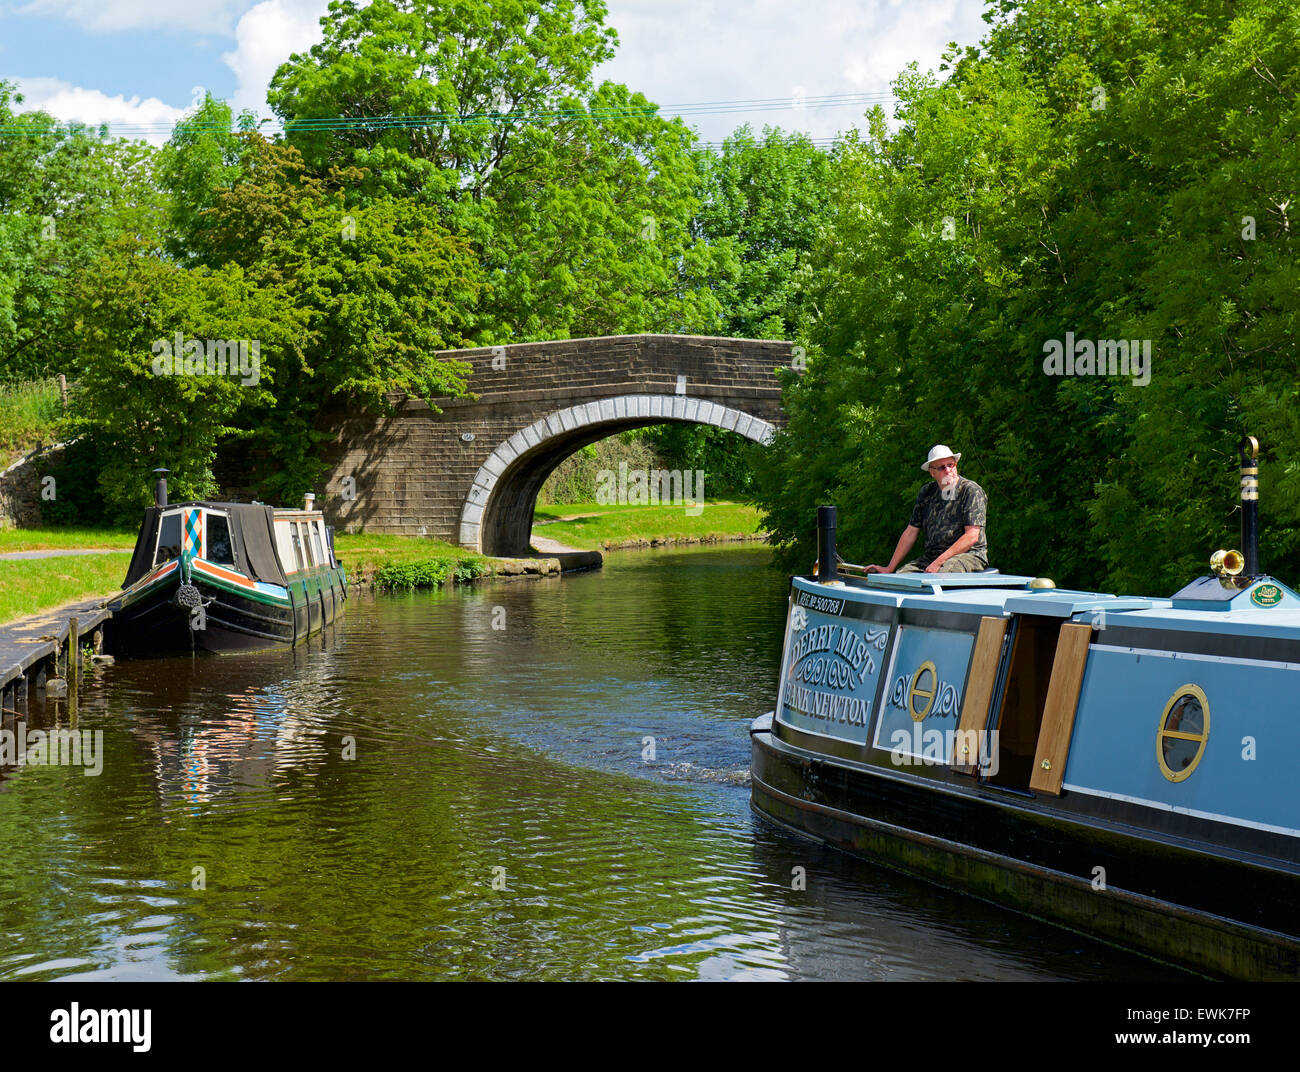 Boats On Leeds Liverpool Canal Stock Photos &amp; Boats On ...